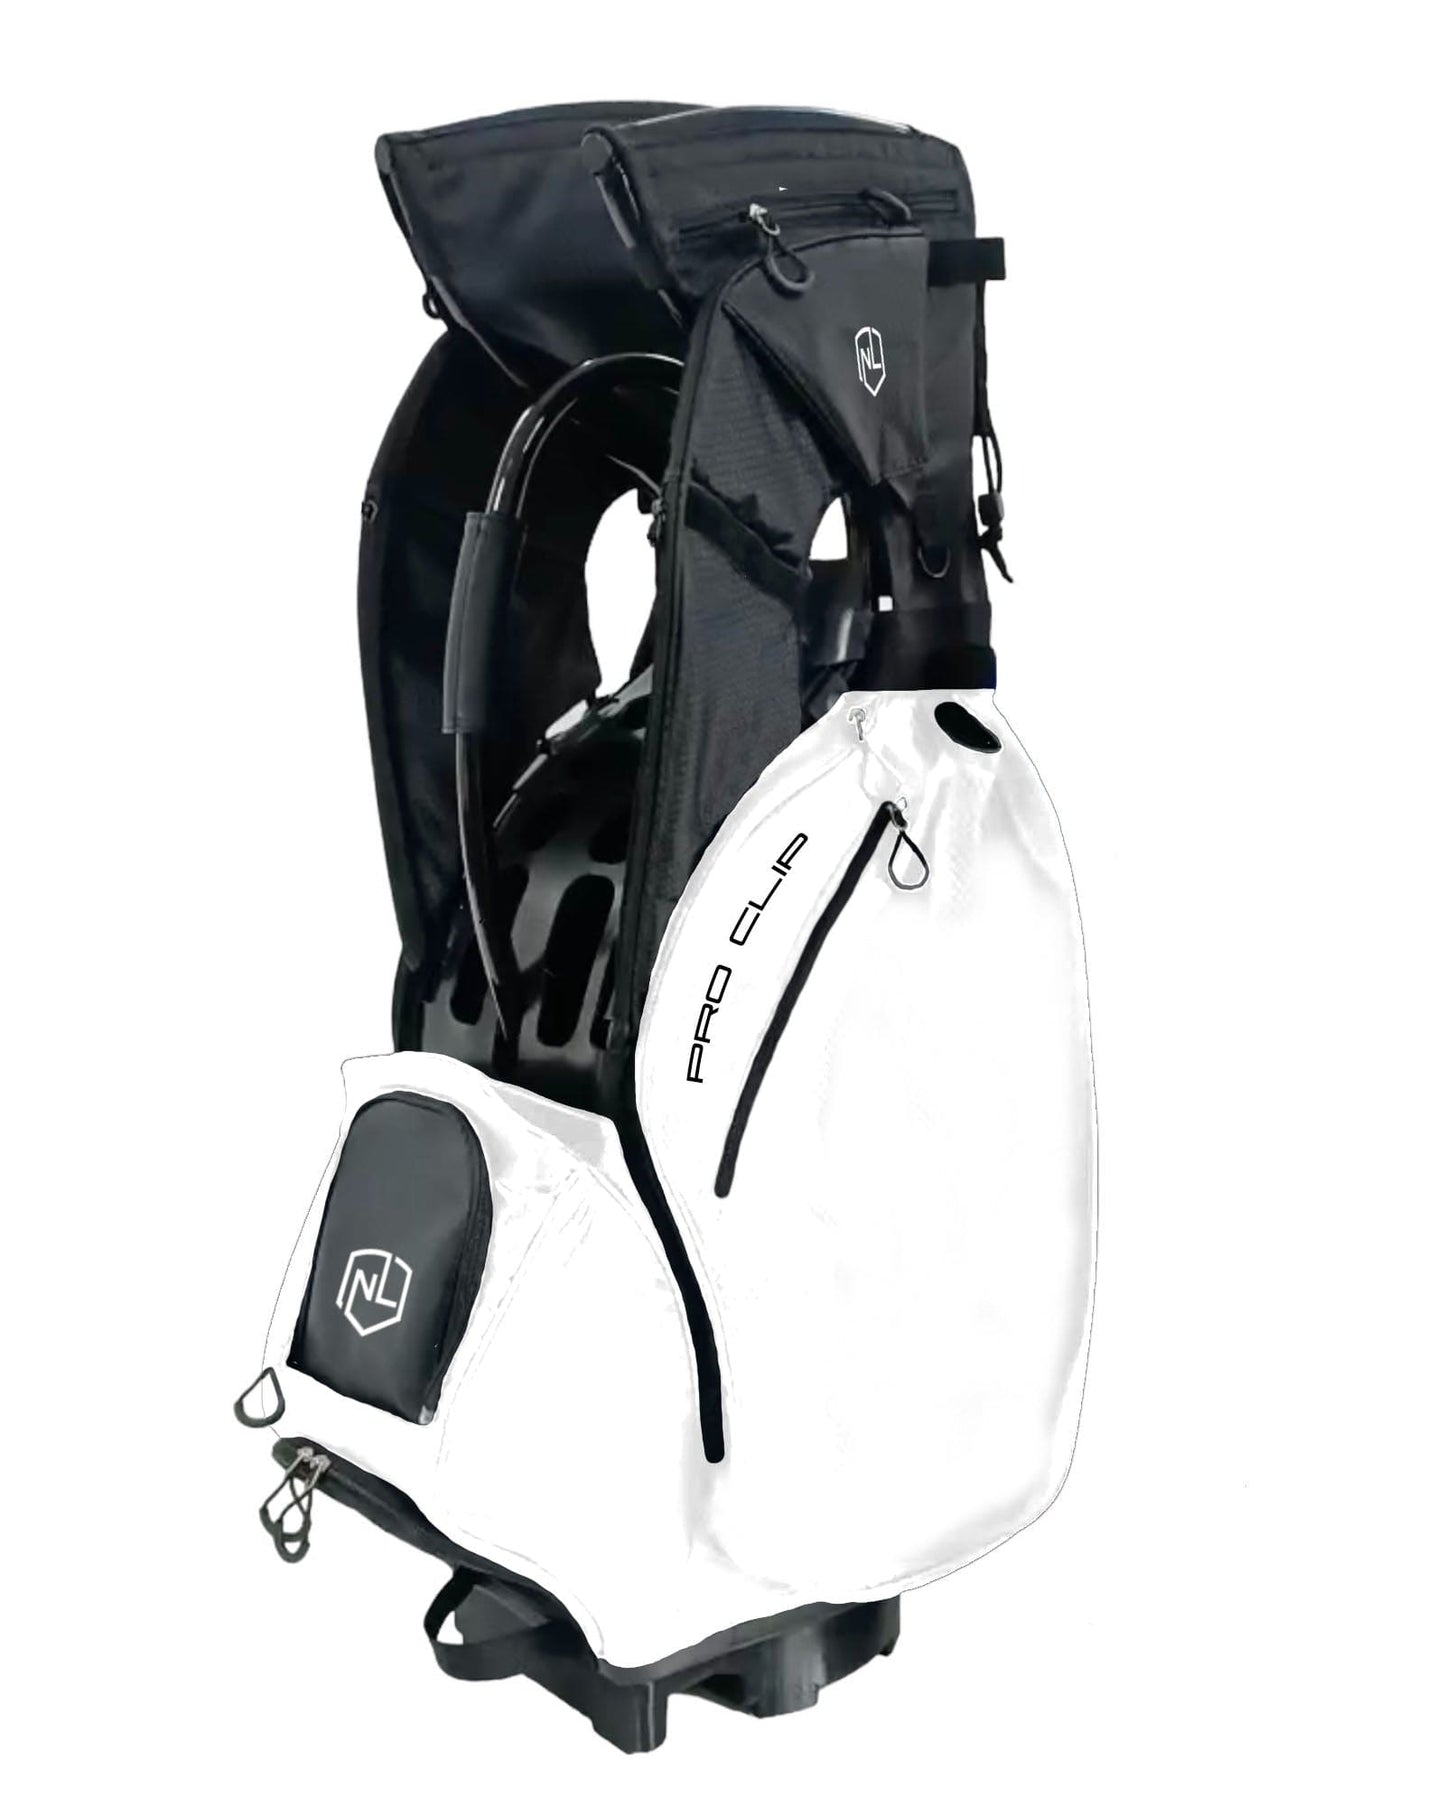 A white NEVR LOOZ exoskin with 18 pockets, umbrella holder tube, D-ring towel holders, padded shoulder strap, and rain hood. Product title: PRO CLIP C2 - ExoSkin.